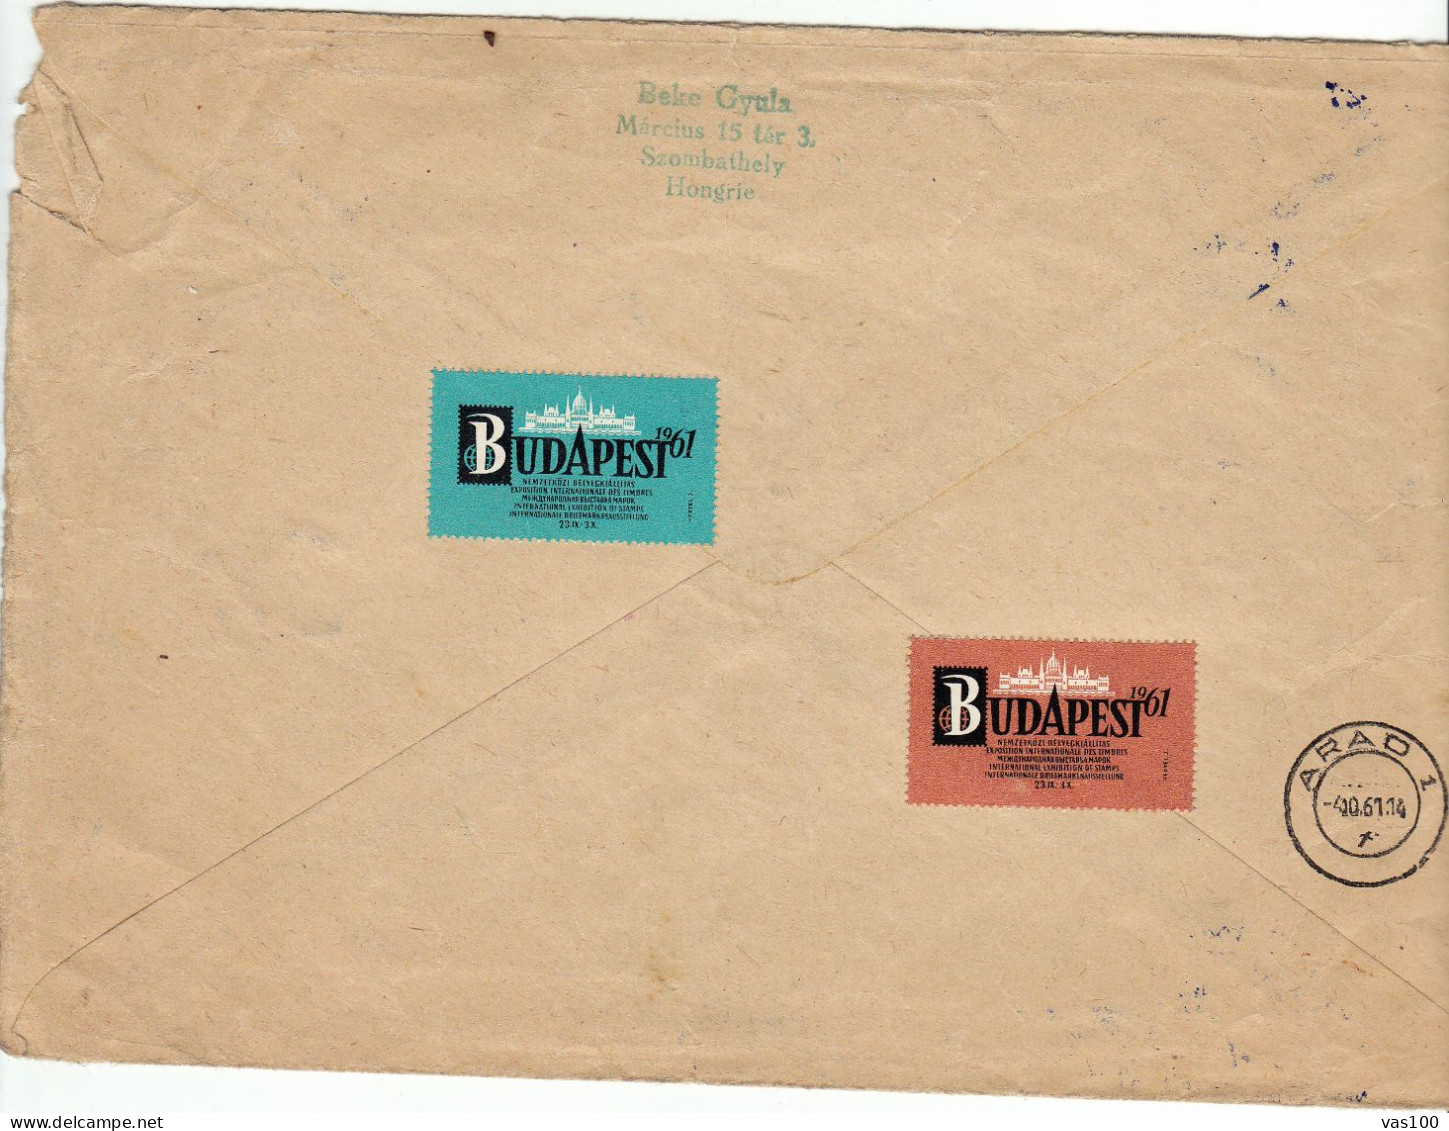 HISTORICAL DOCUMENTS  REGISTERED   COVERS NICE FRANKING  1960  HUNGARY - Covers & Documents